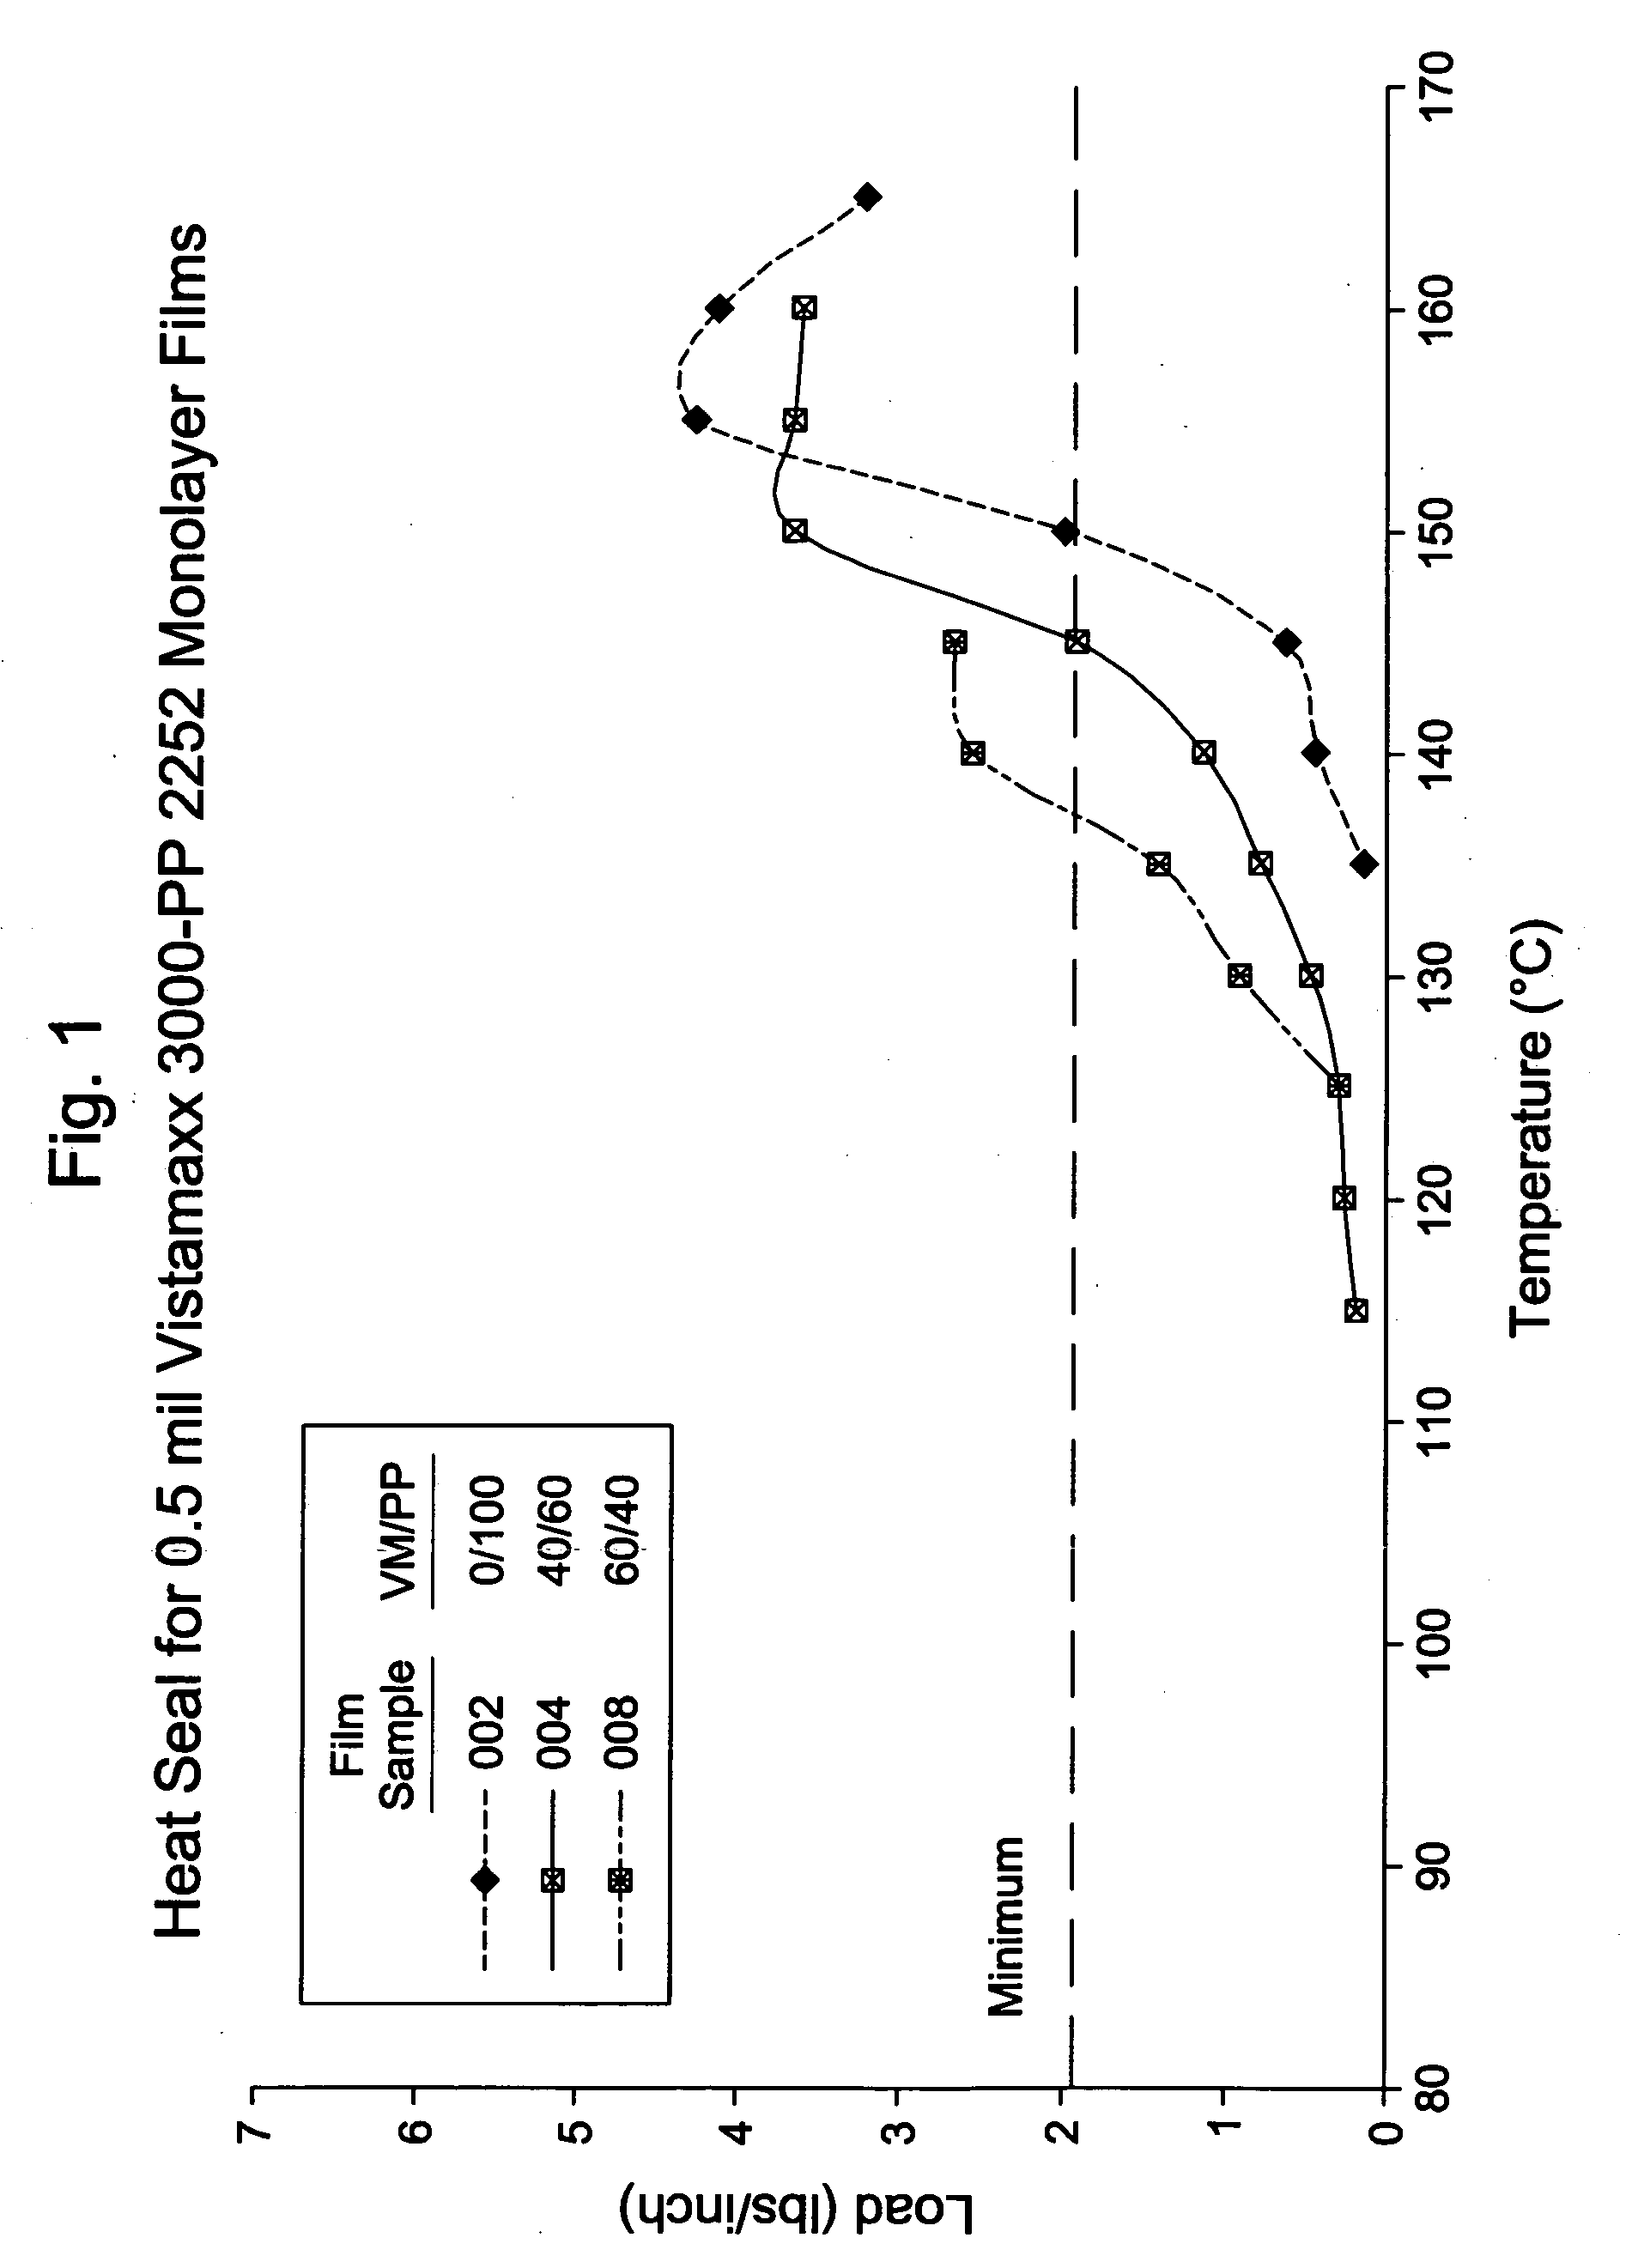 Films incorporating polymeric material combinations, articles made therefrom, and methods of making such films and articles